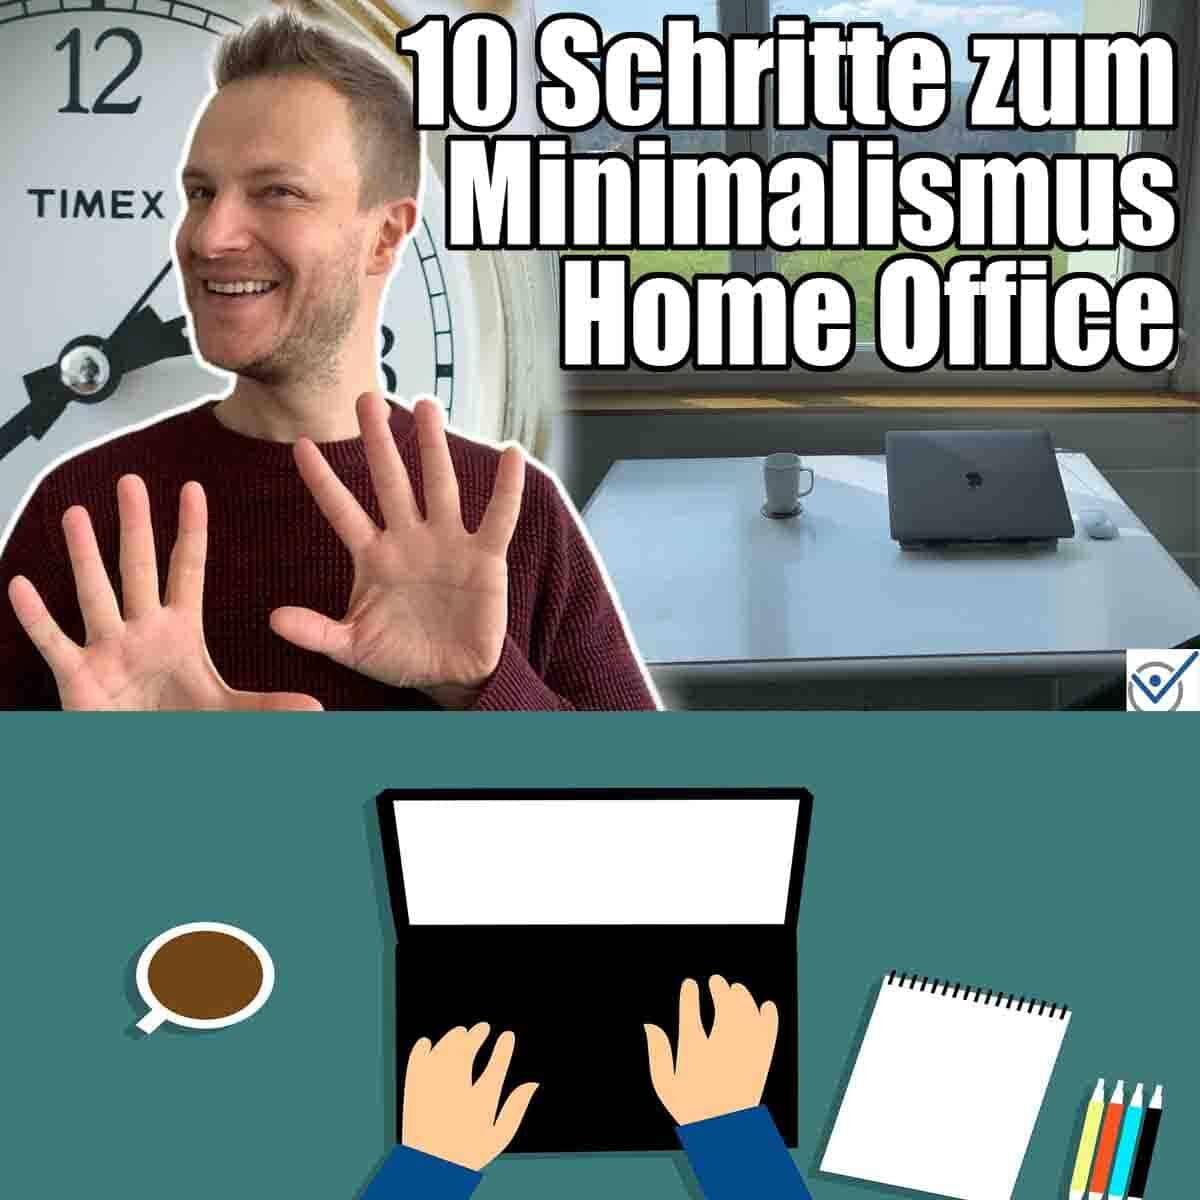 Home Office Tipps